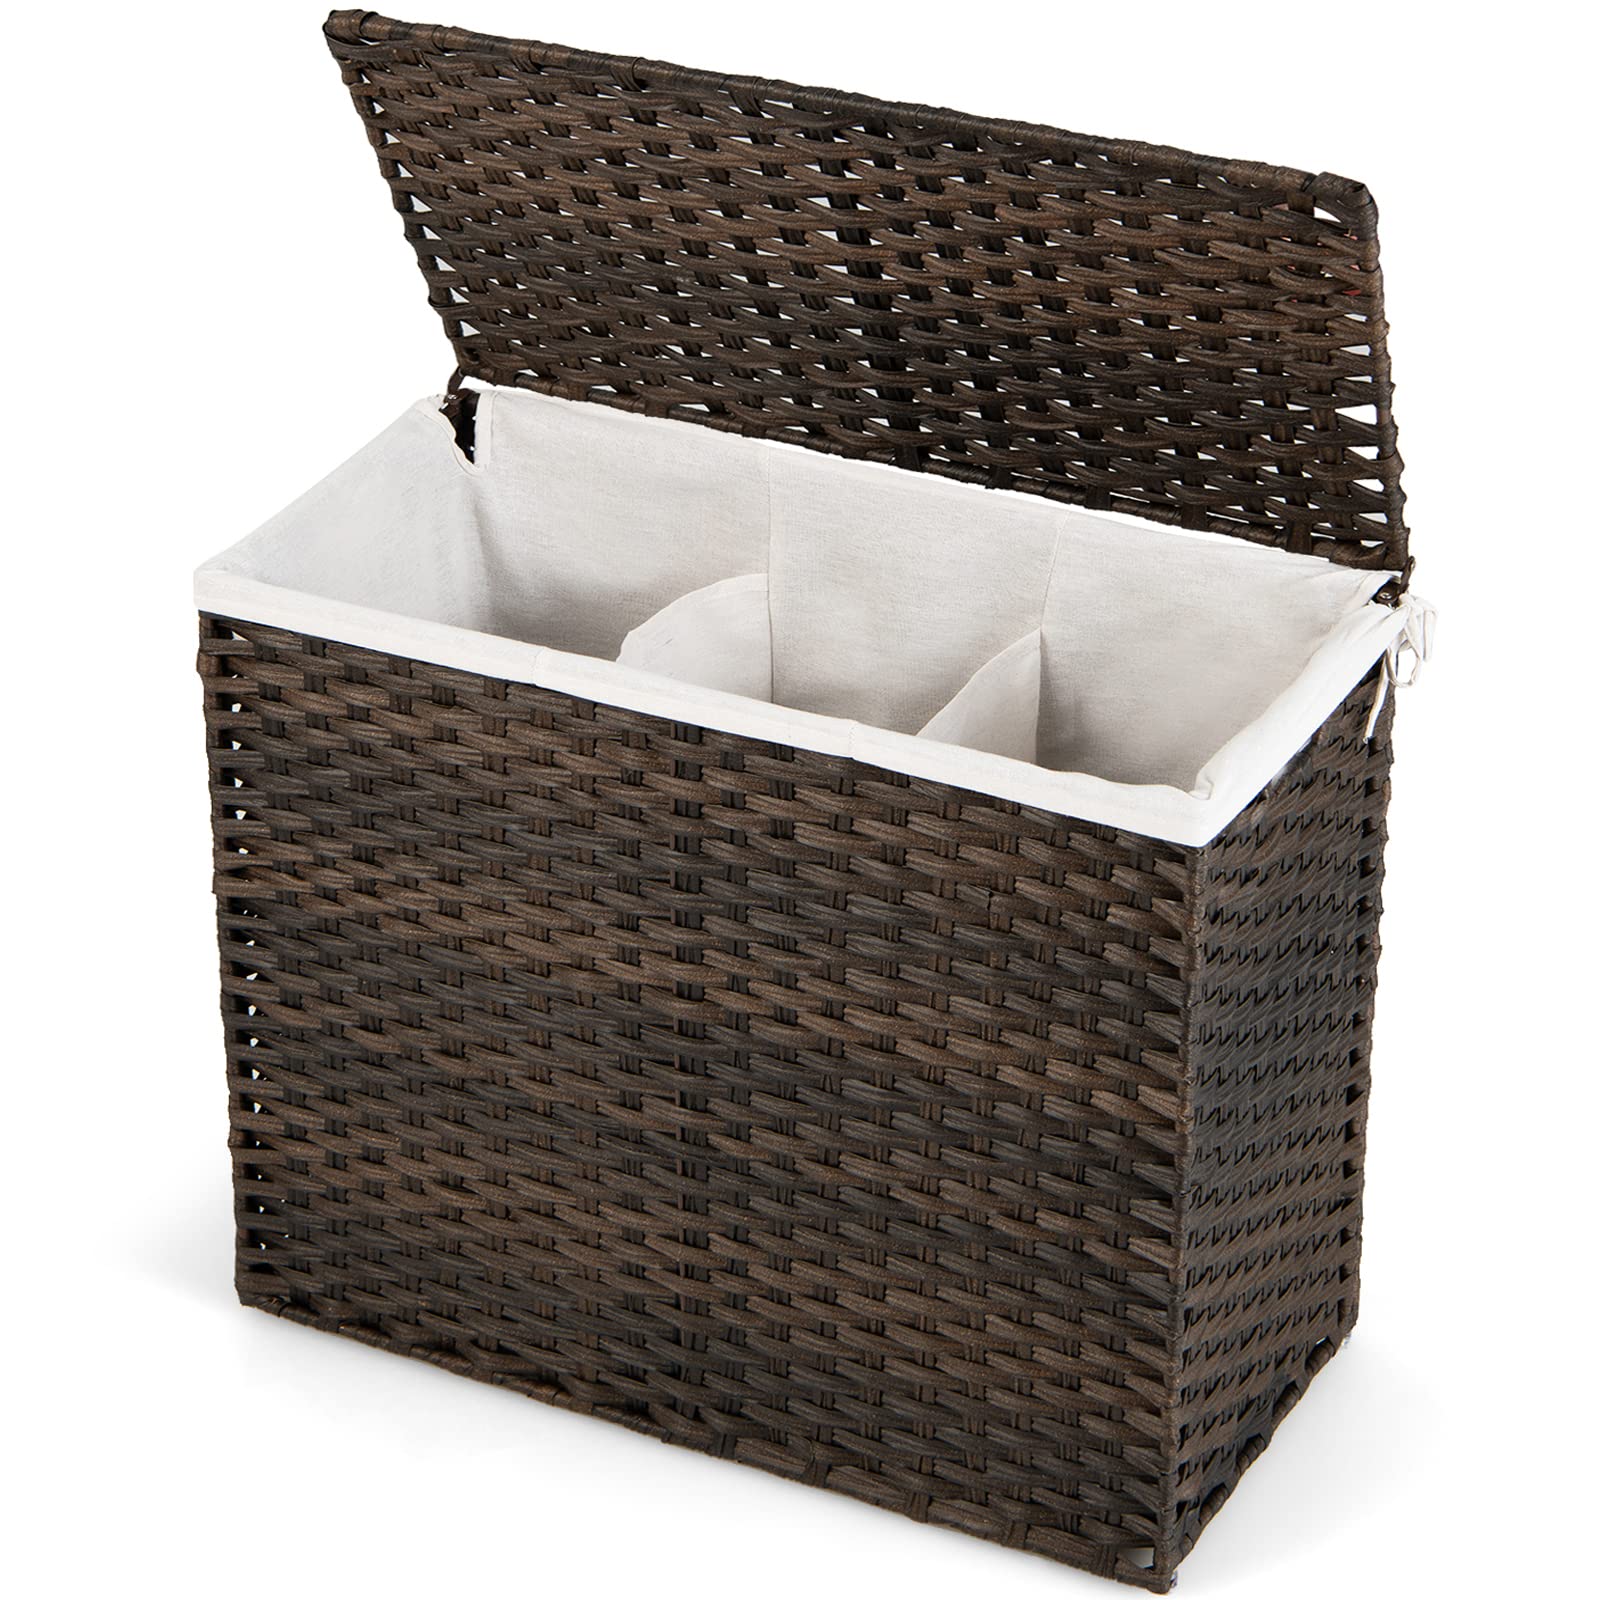 Giantex Laundry Hamper with Lid and Handle, 29 Gal (110L) Wicker Laundry Basket (Brown)